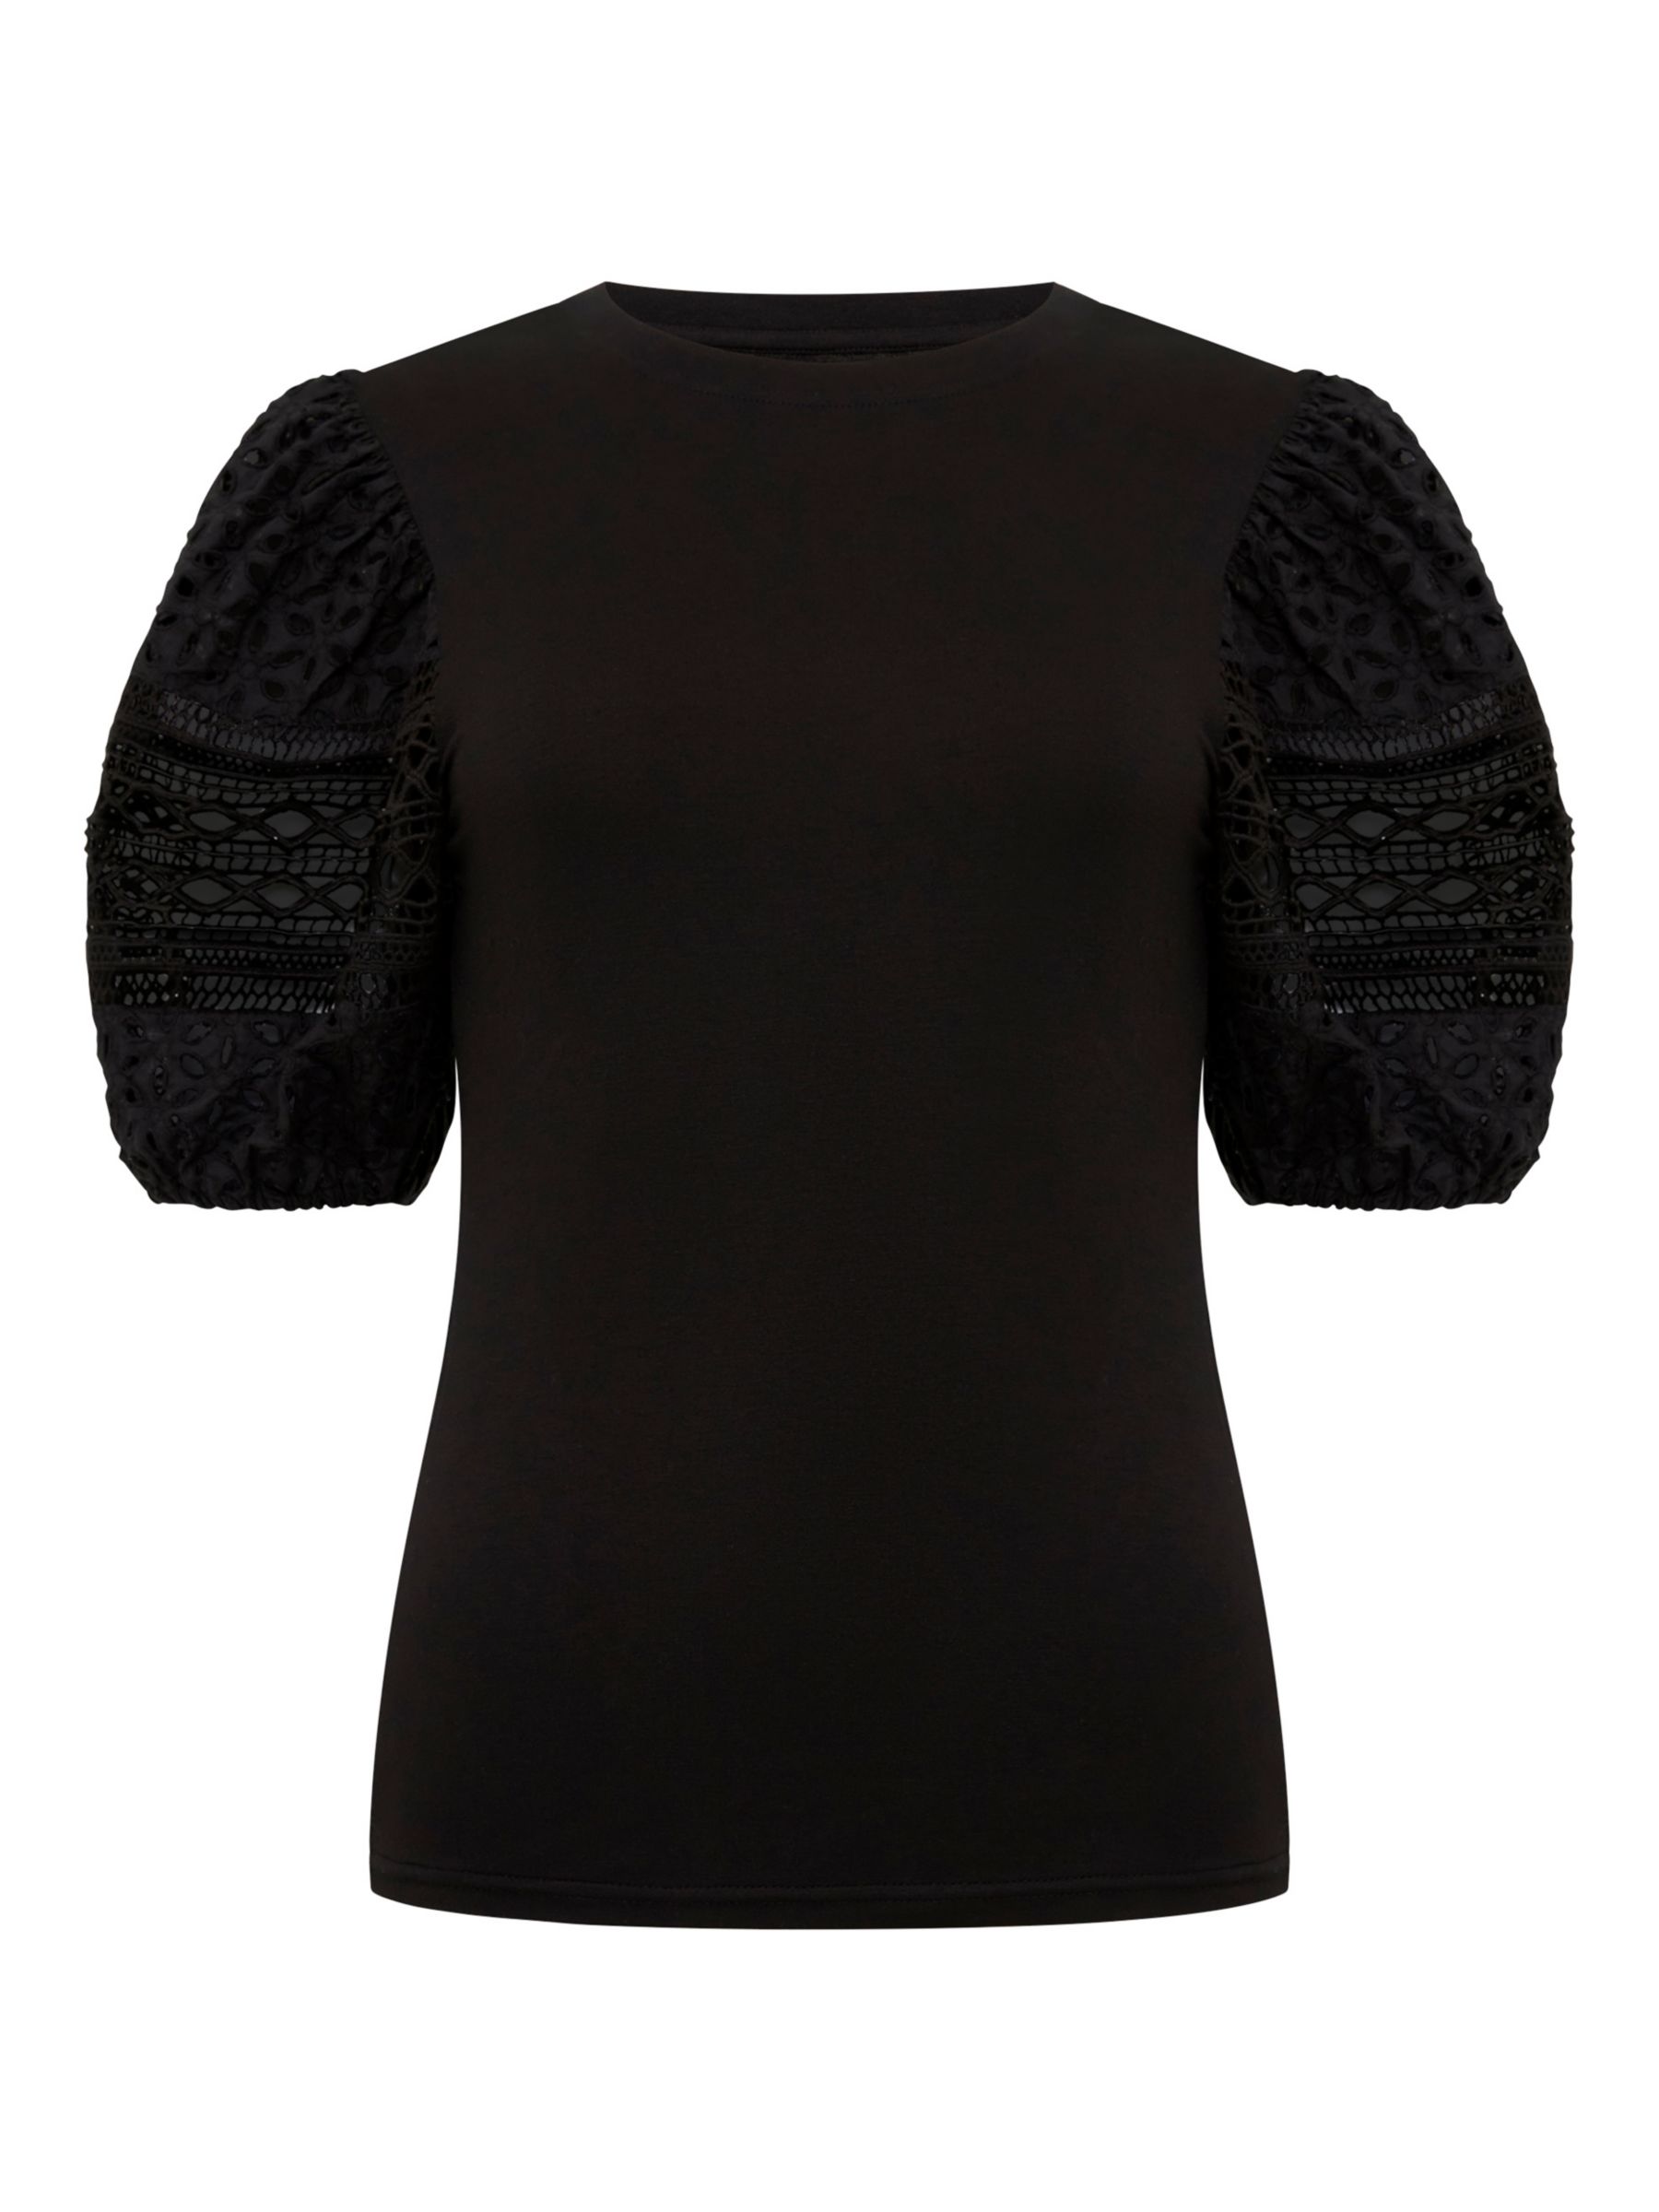 French Connection Rosana Anges Embroidered Sleeve T-Shirt, Blackout, M